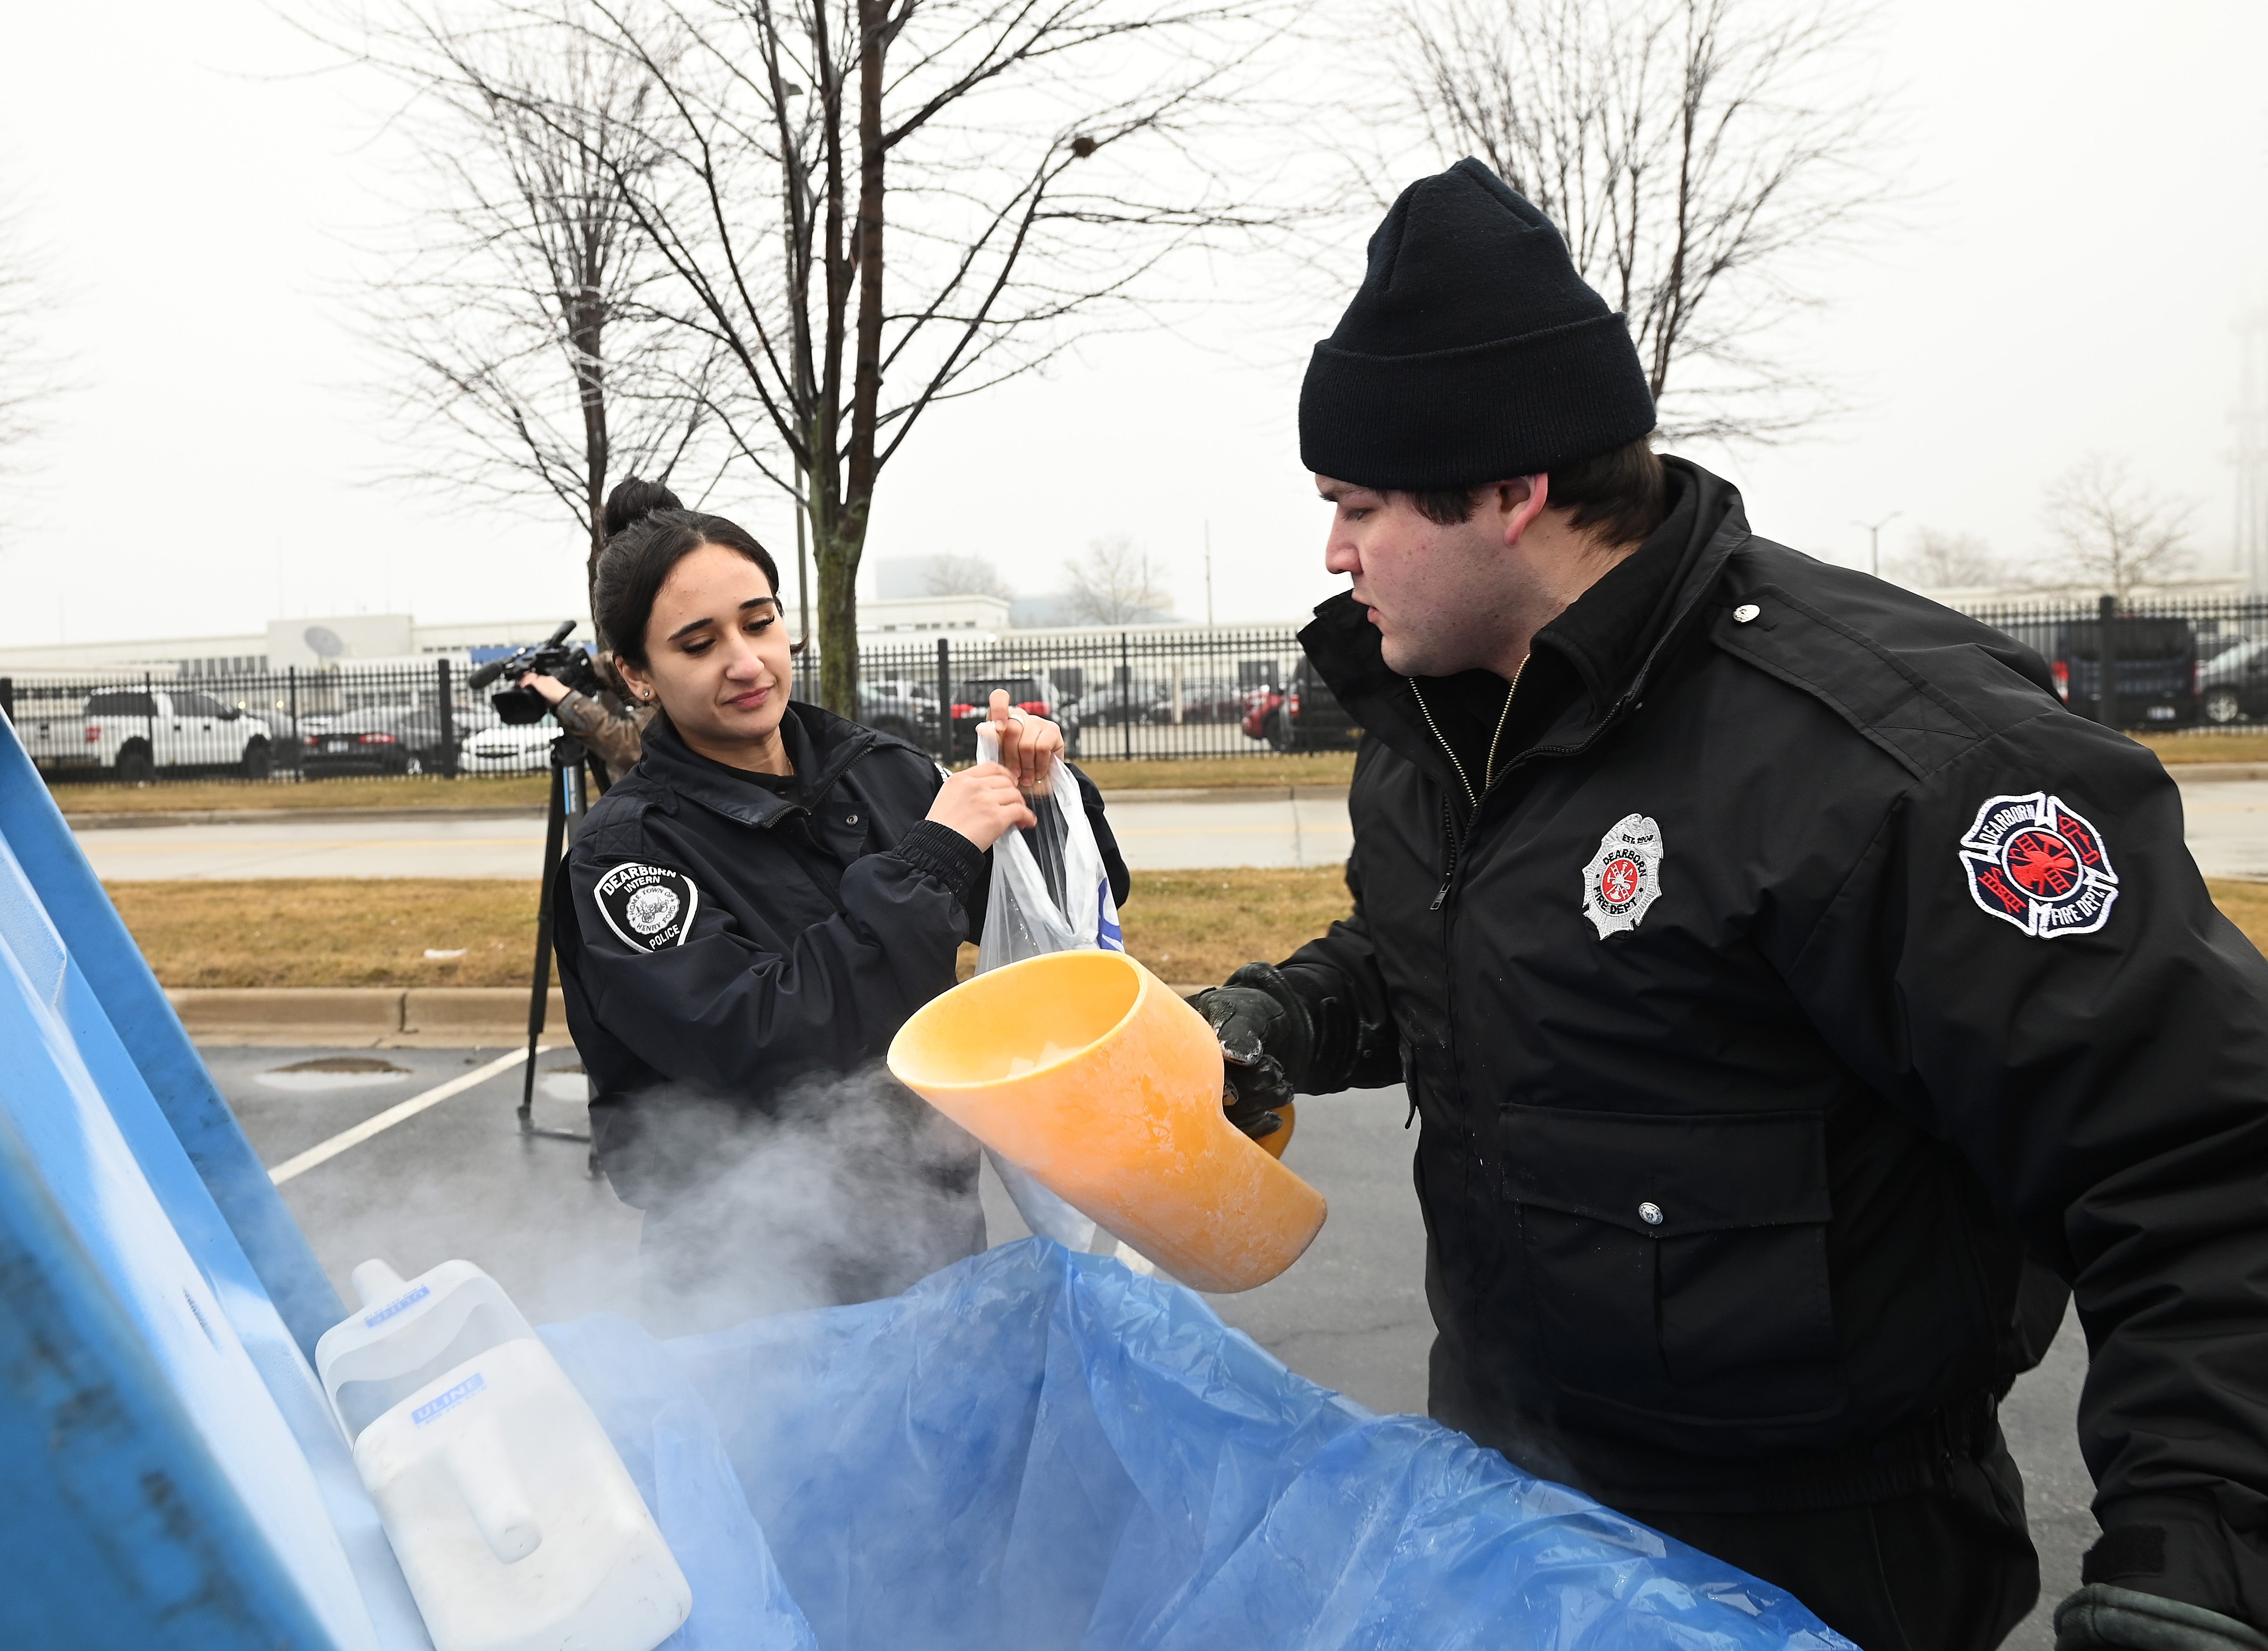 L-r, Dalal Abuhassan, 21, Police Intern of the City of Dearborn and Joey Herrera, 25, Fire Dept. Intern, packs bags of dry ice for residents during the free give away by the City of Dearborn to help residents affected by the ice storm. February 23, 2023, Dearborn, MI.